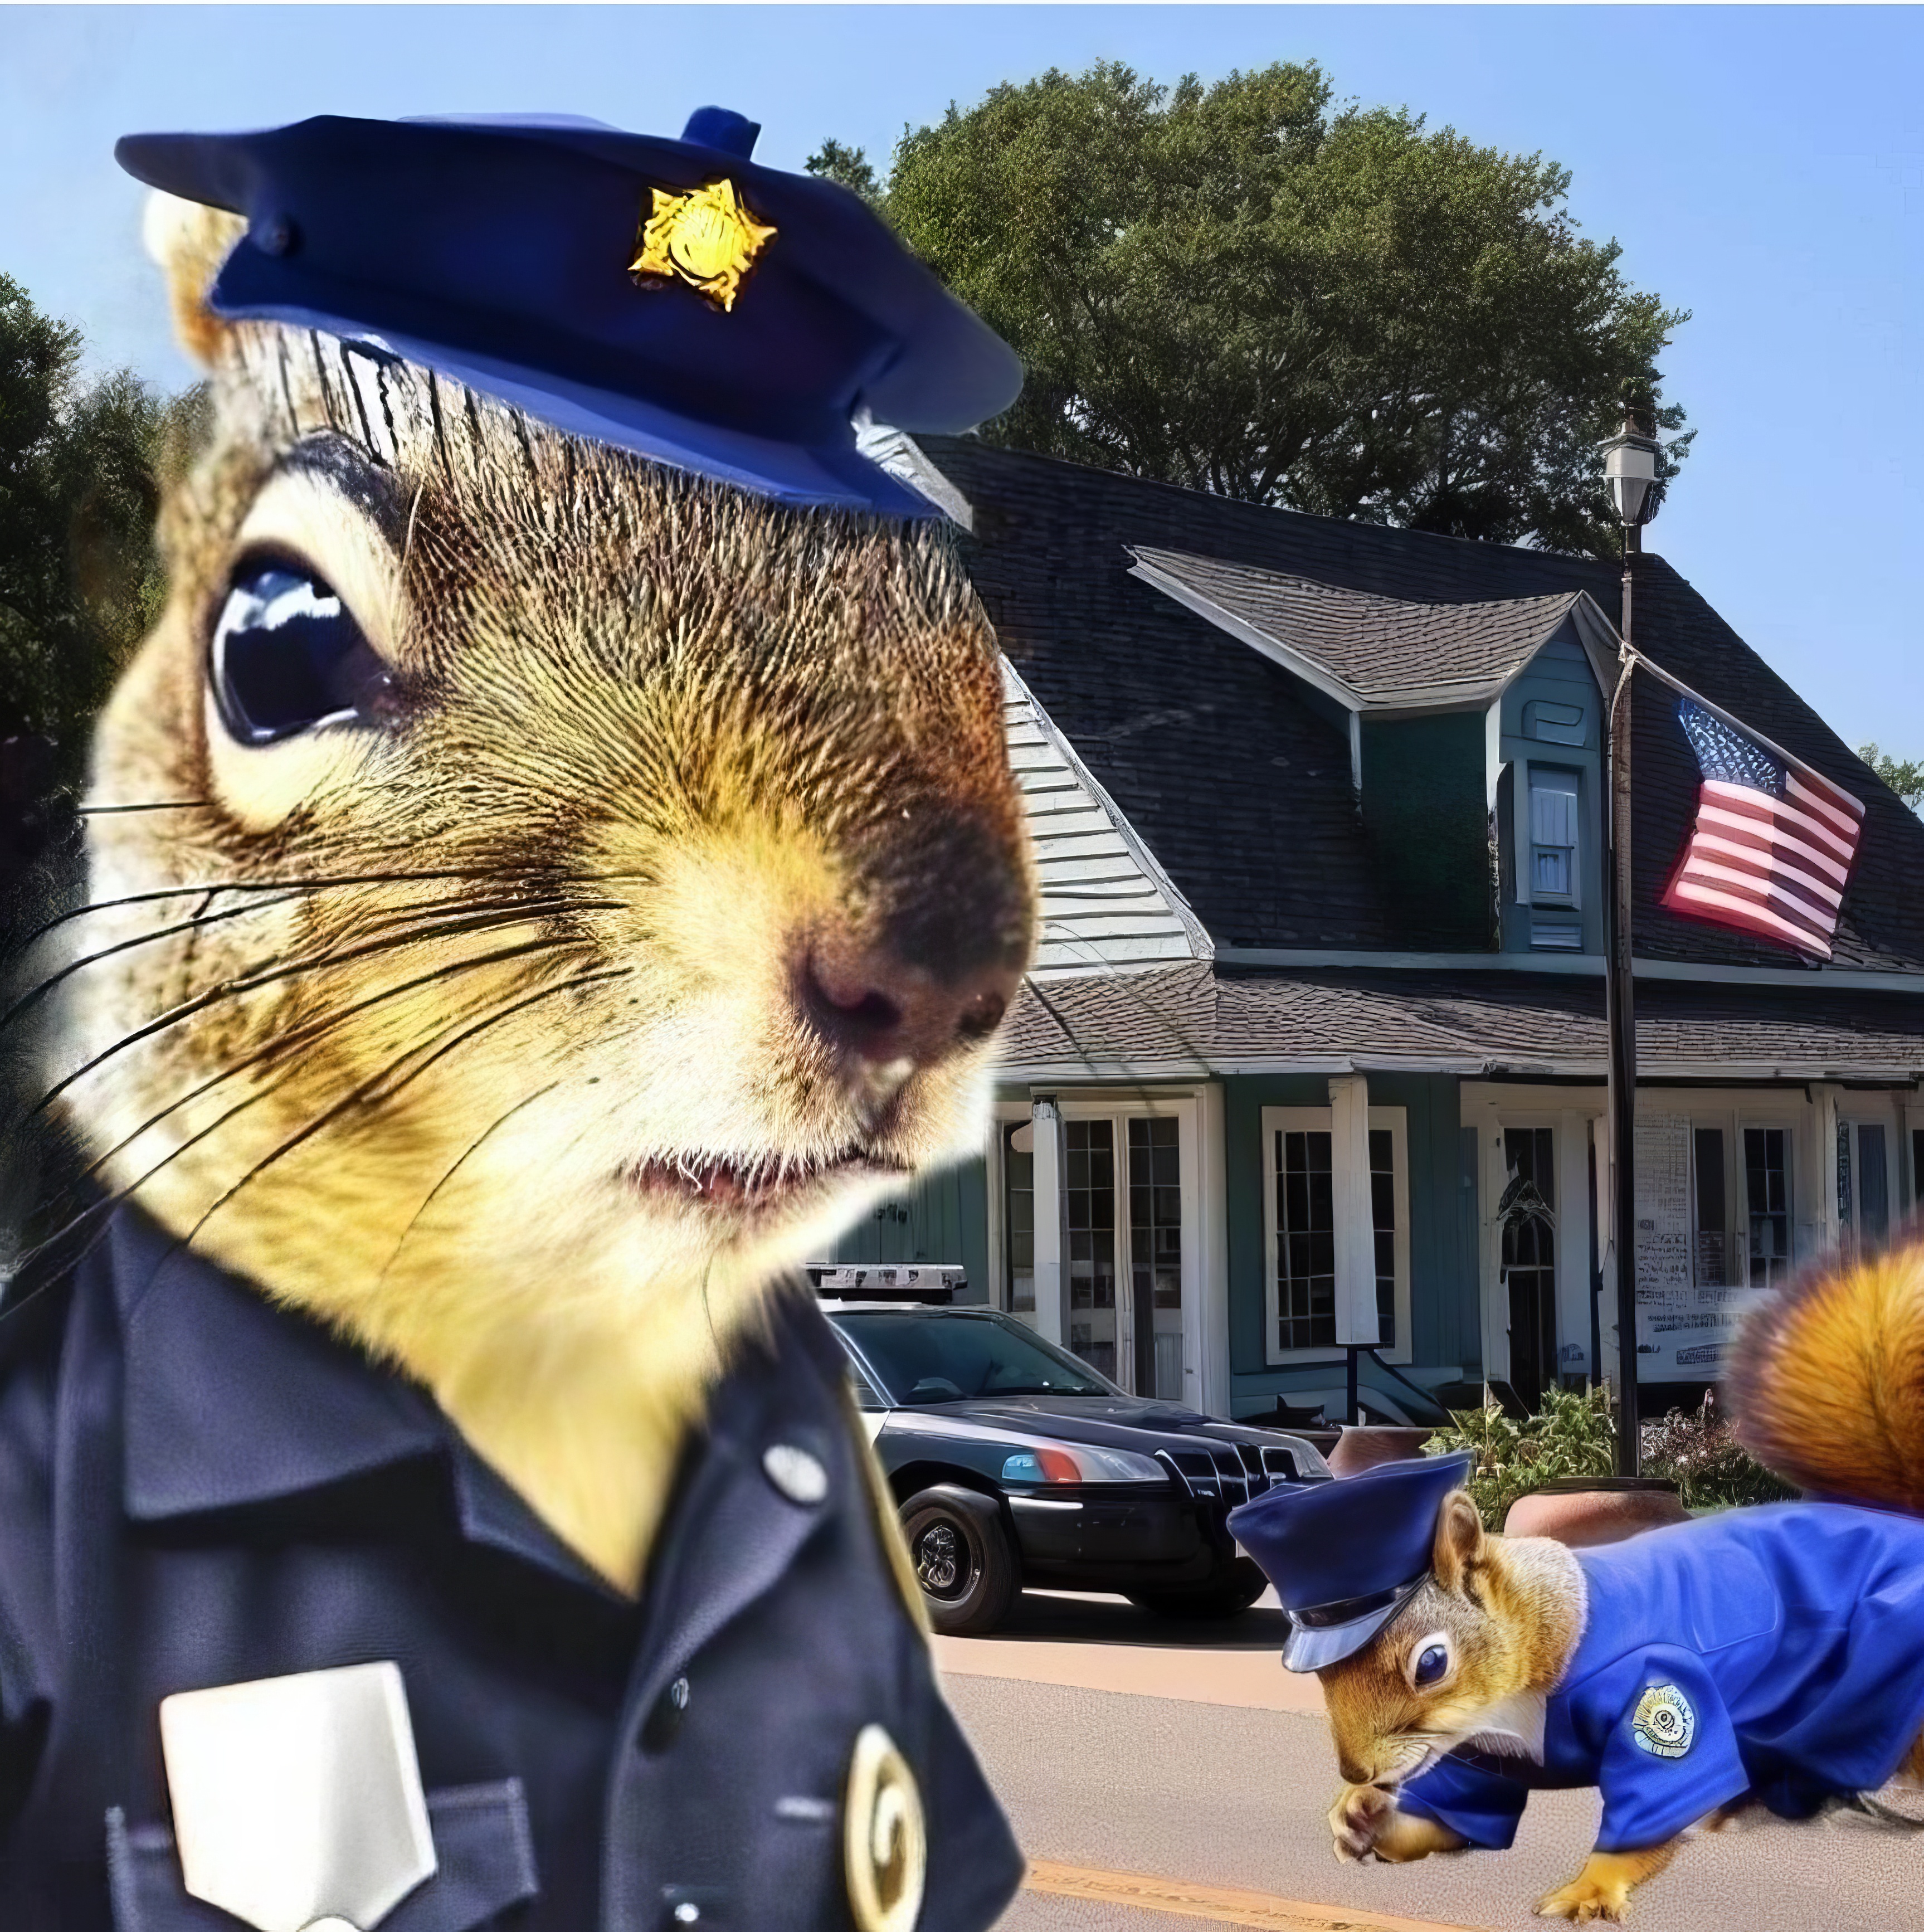 A picture of a squirrel in a police hat in front of a rural police station.